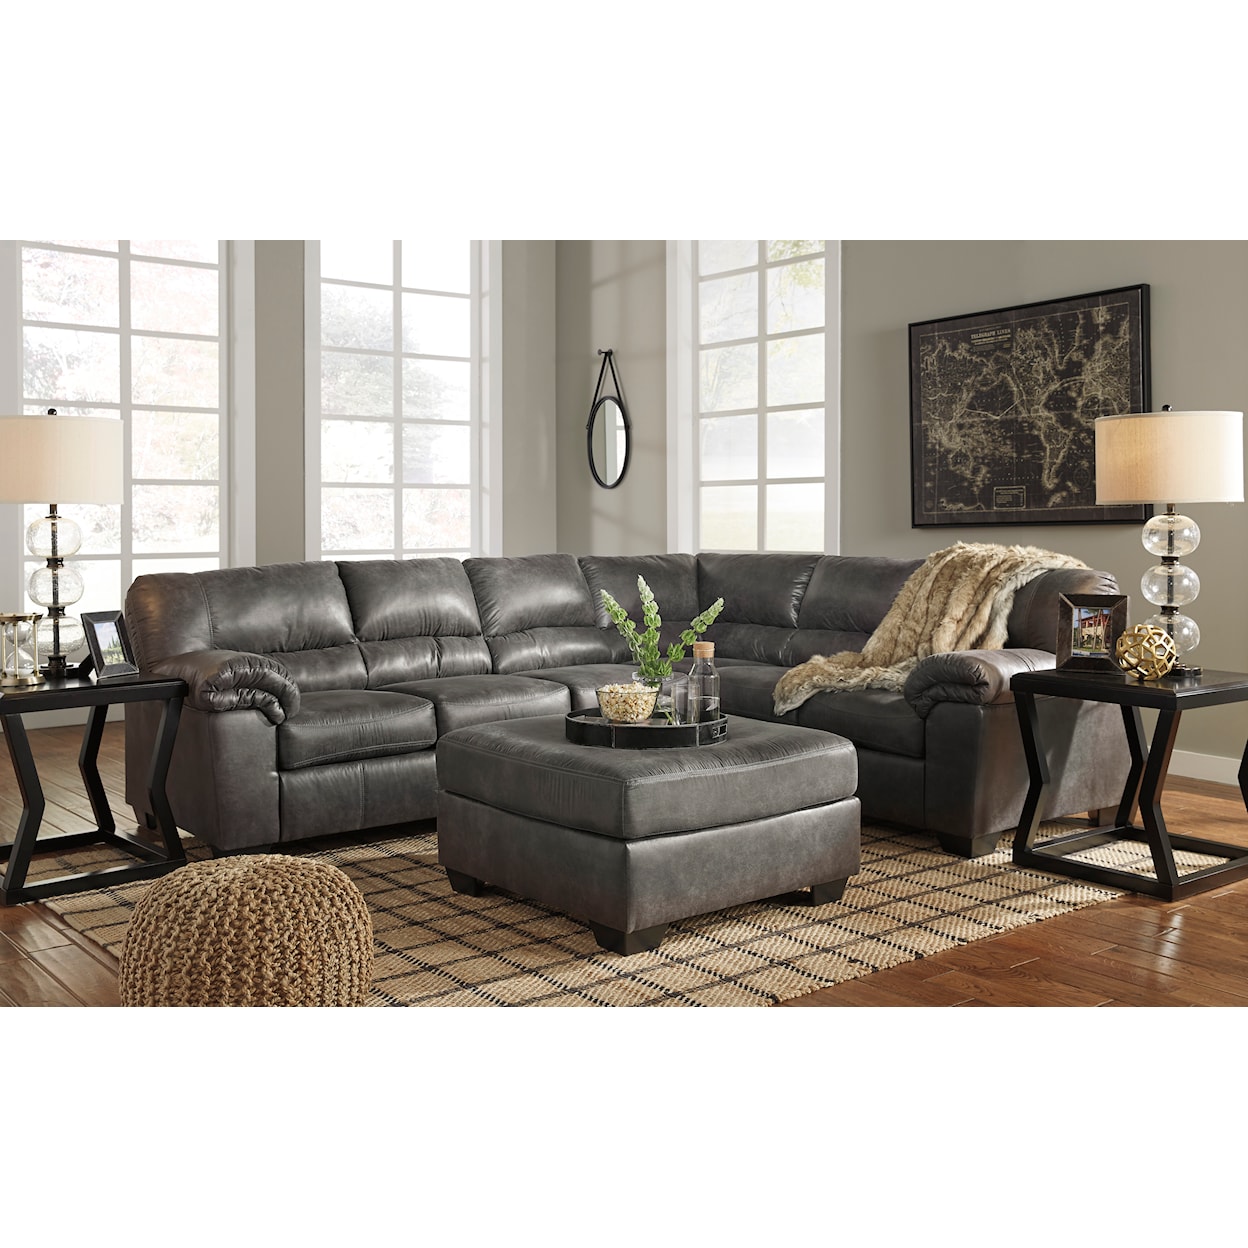 Signature Design by Ashley Bladen 3-Piece Sectional with Ottoman